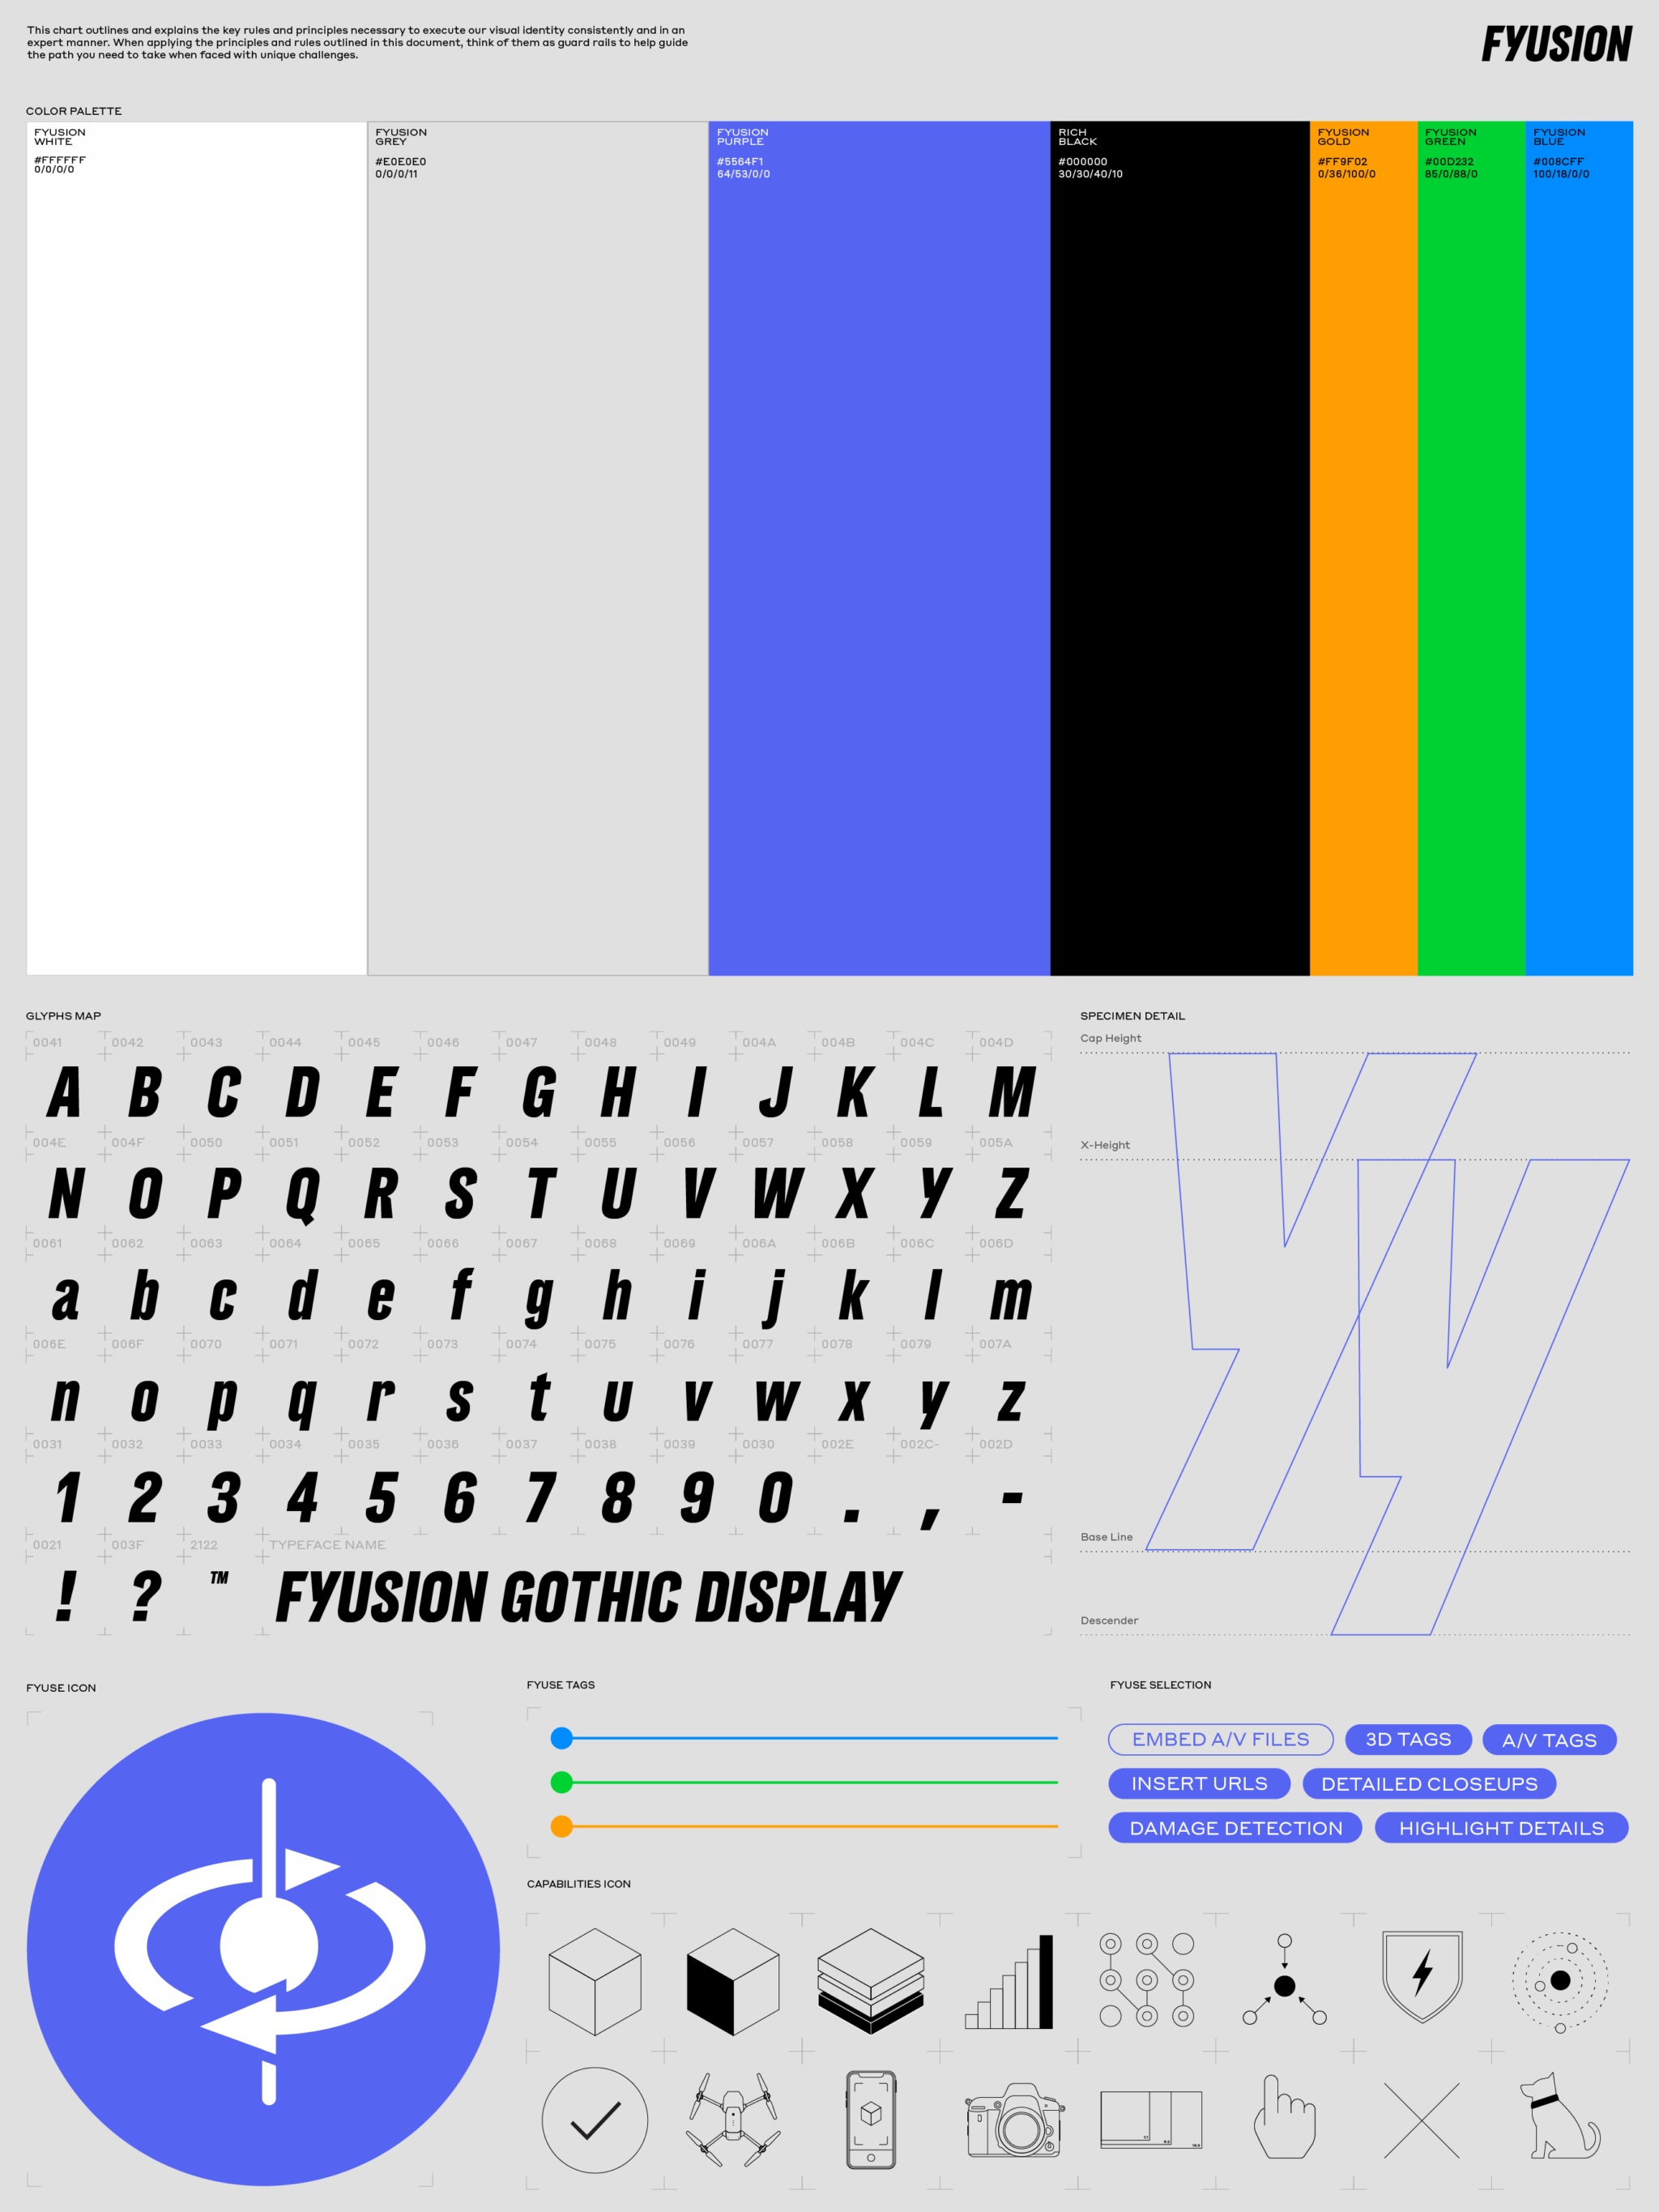 Fyusion brand elements as a poster